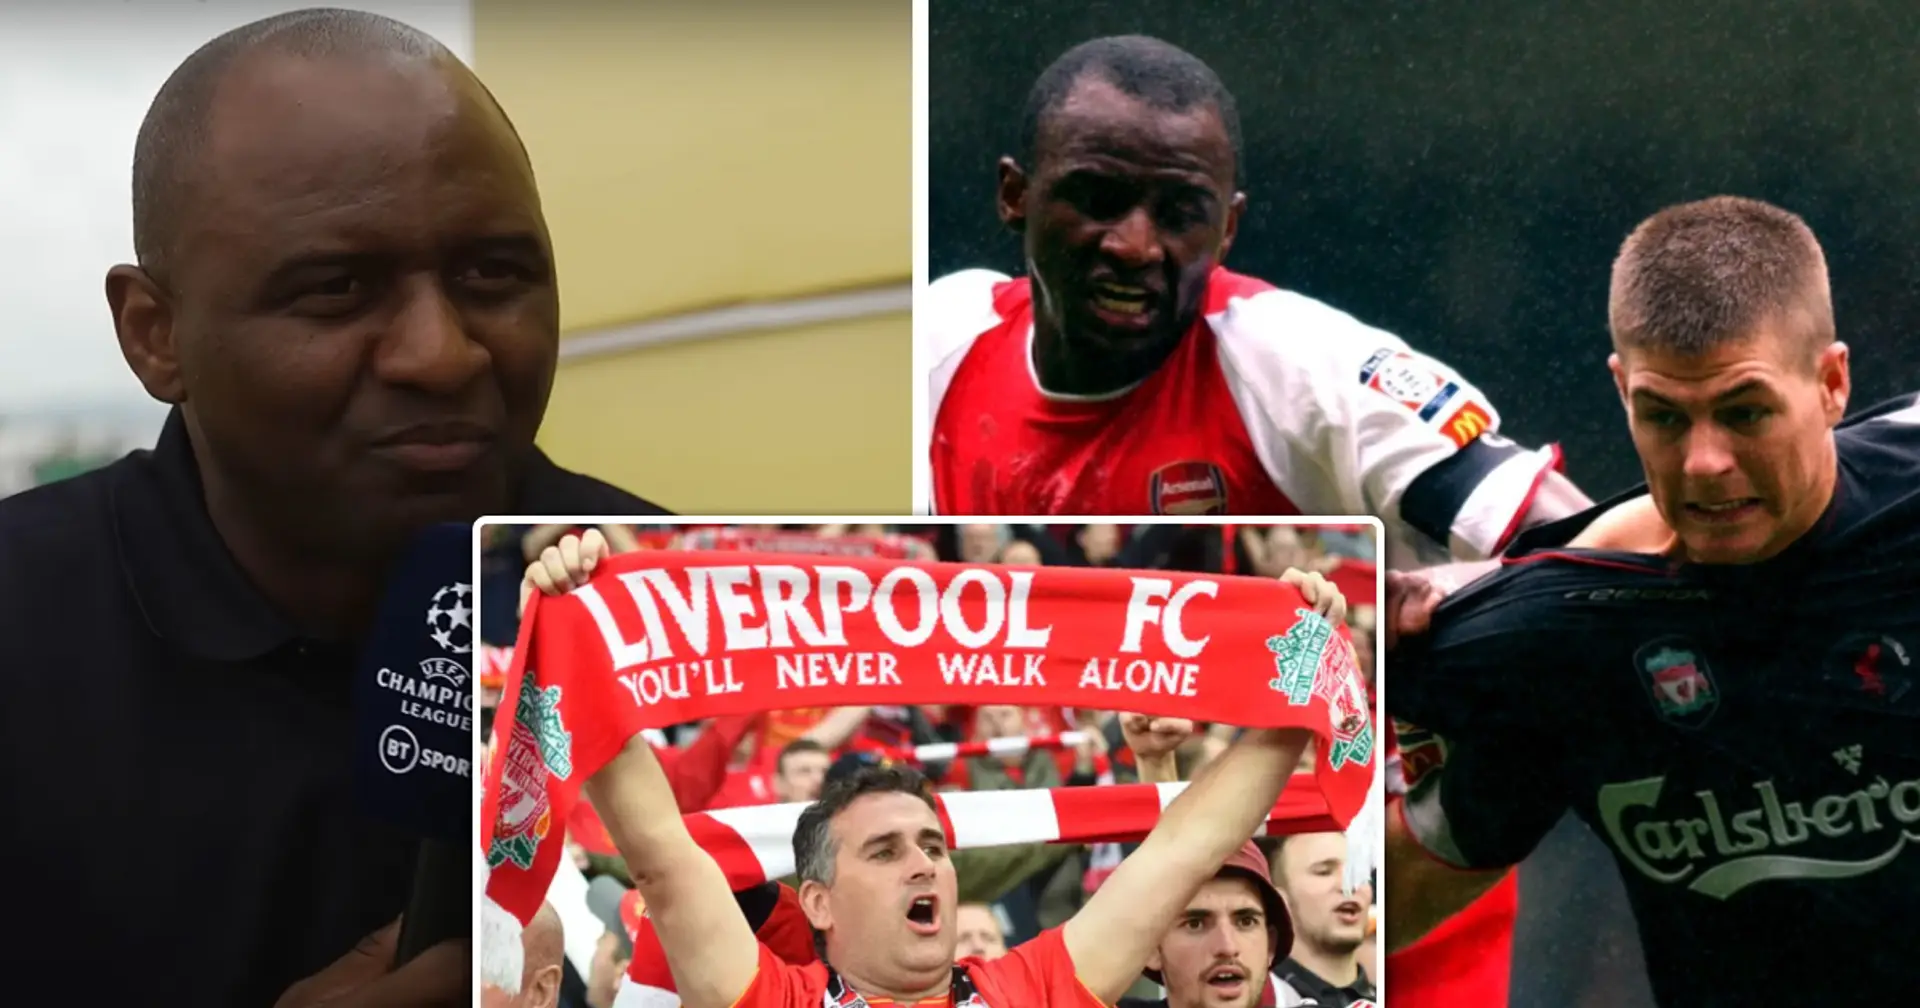 'They make it really special for the players': Patrick Vieira on Anfield atmosphere